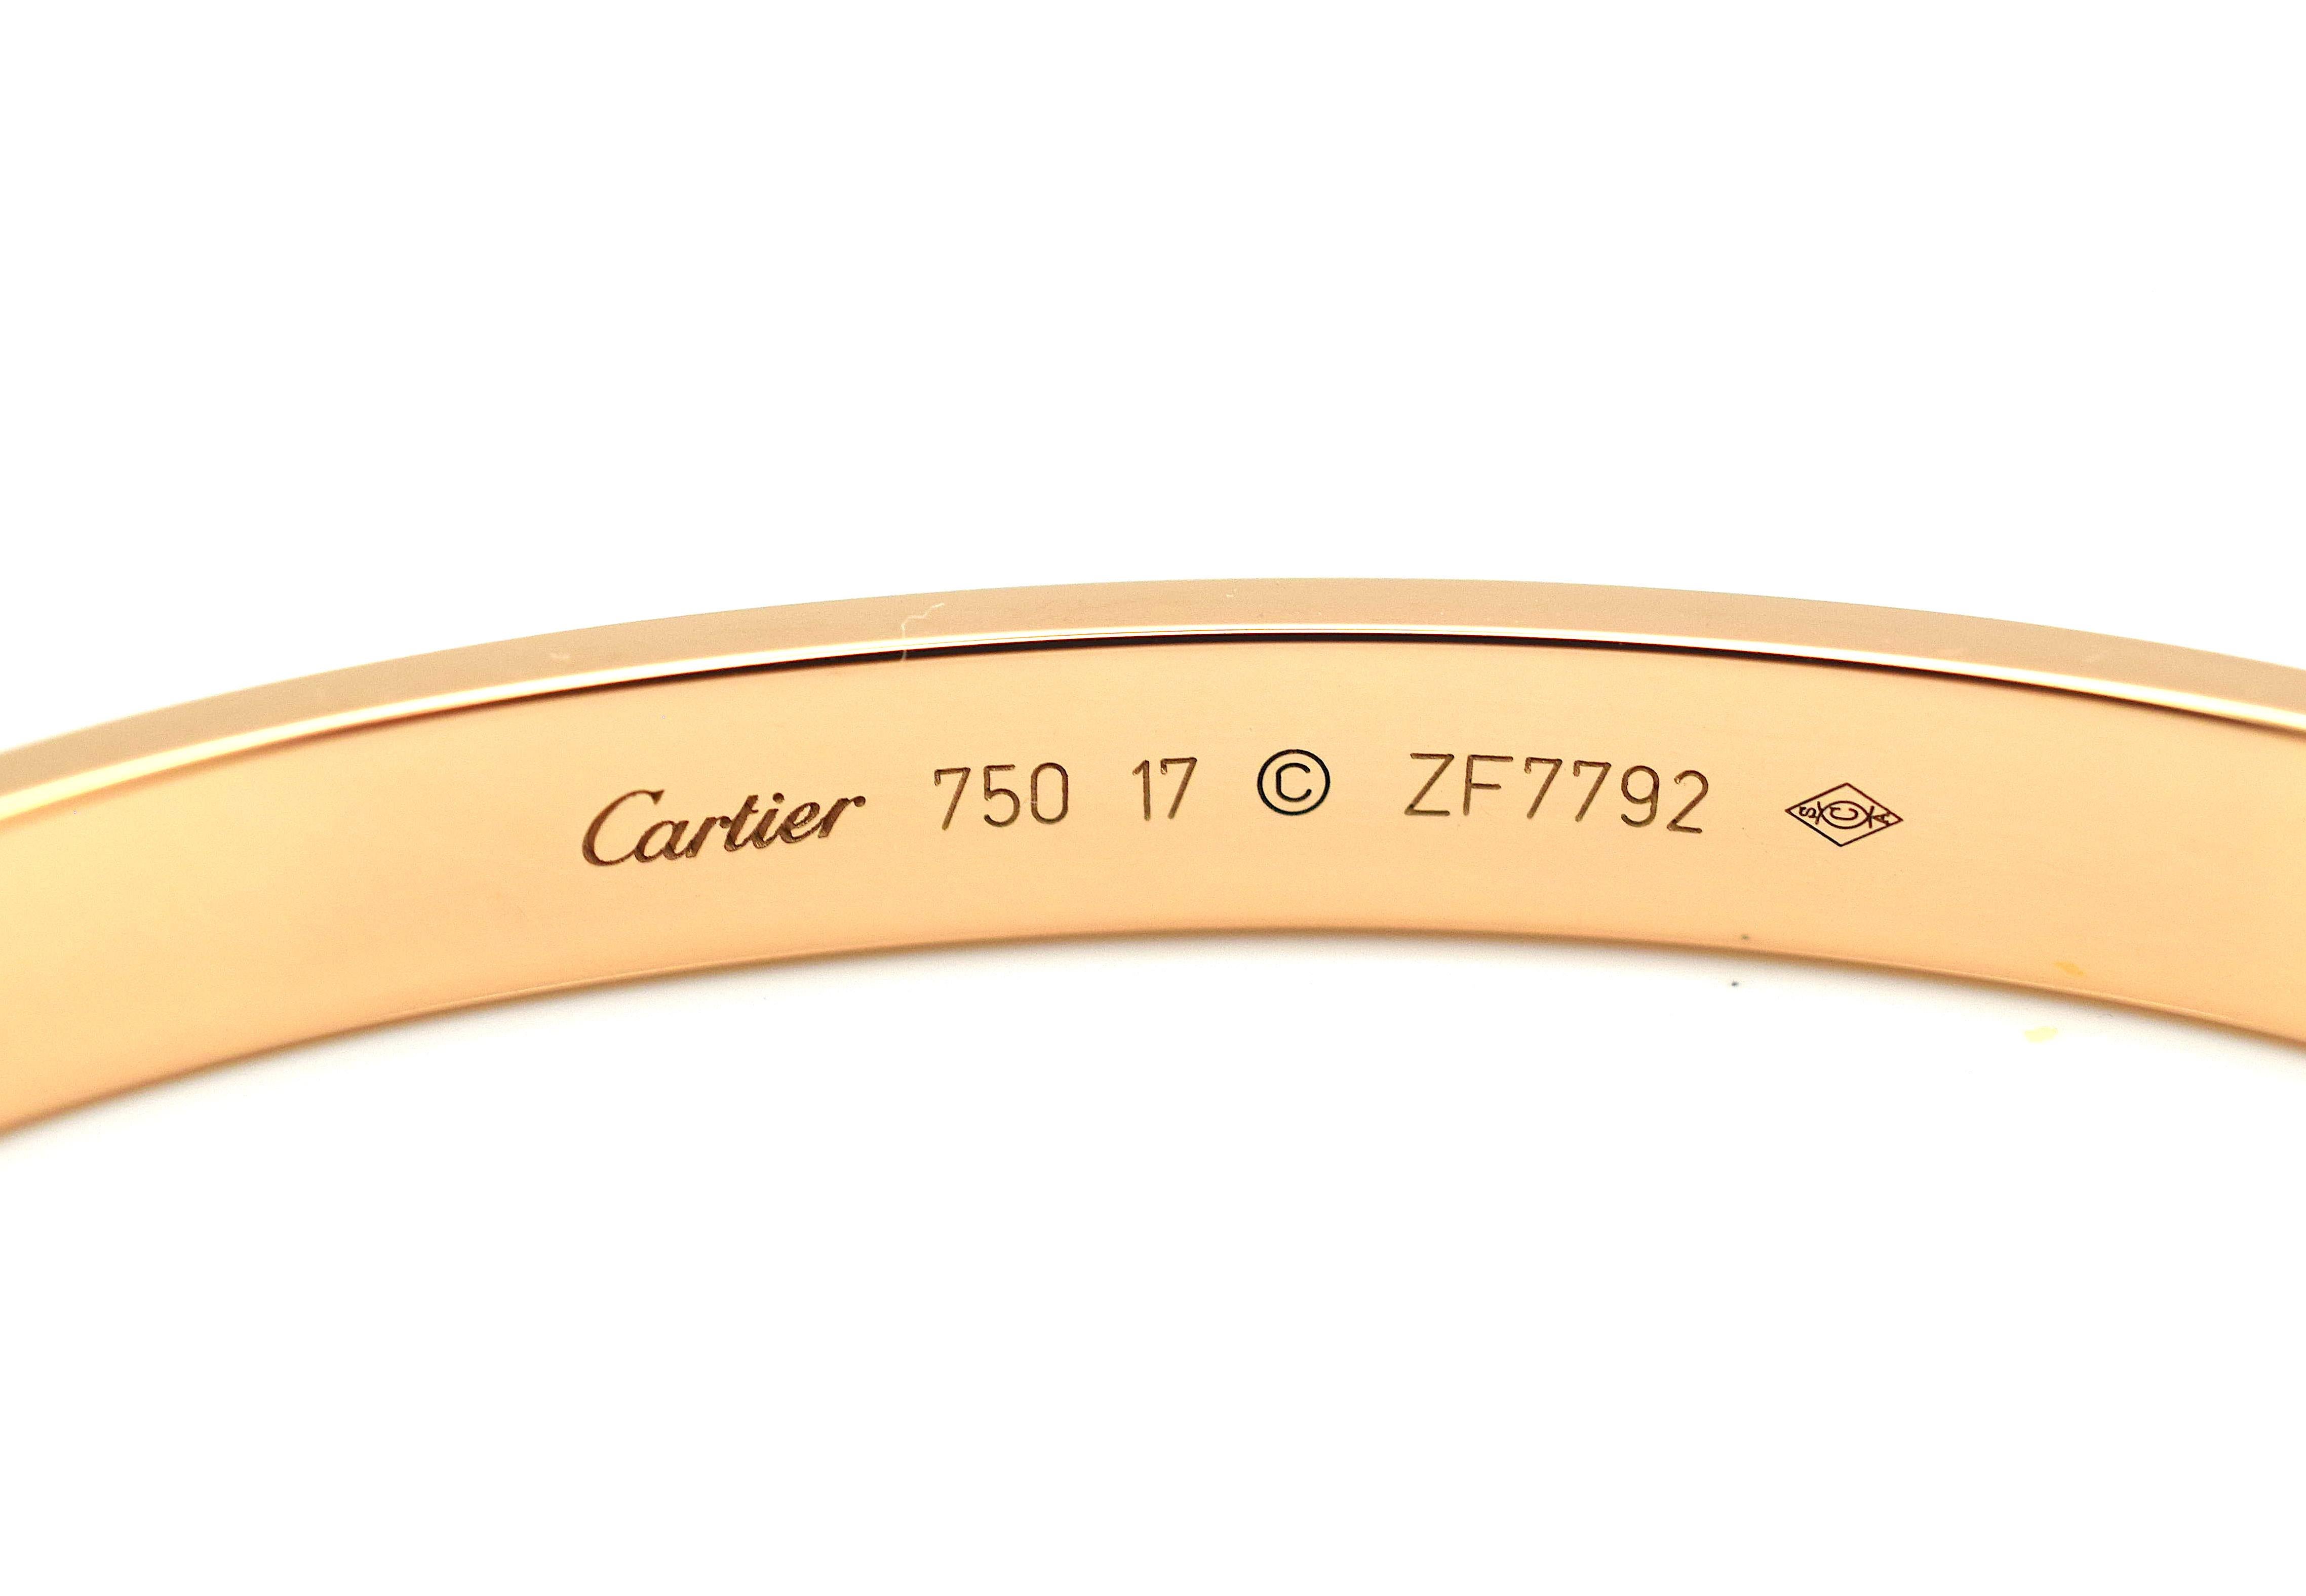 A signature 18k Rose Gold Cartier bracelet from the Love collection. The bracelet is a size 17 and has a gross weight of 33.0 grams. Original box and key included. Pristine condition, shows no scratches or wear. Bracelet is hallmarked Serial #